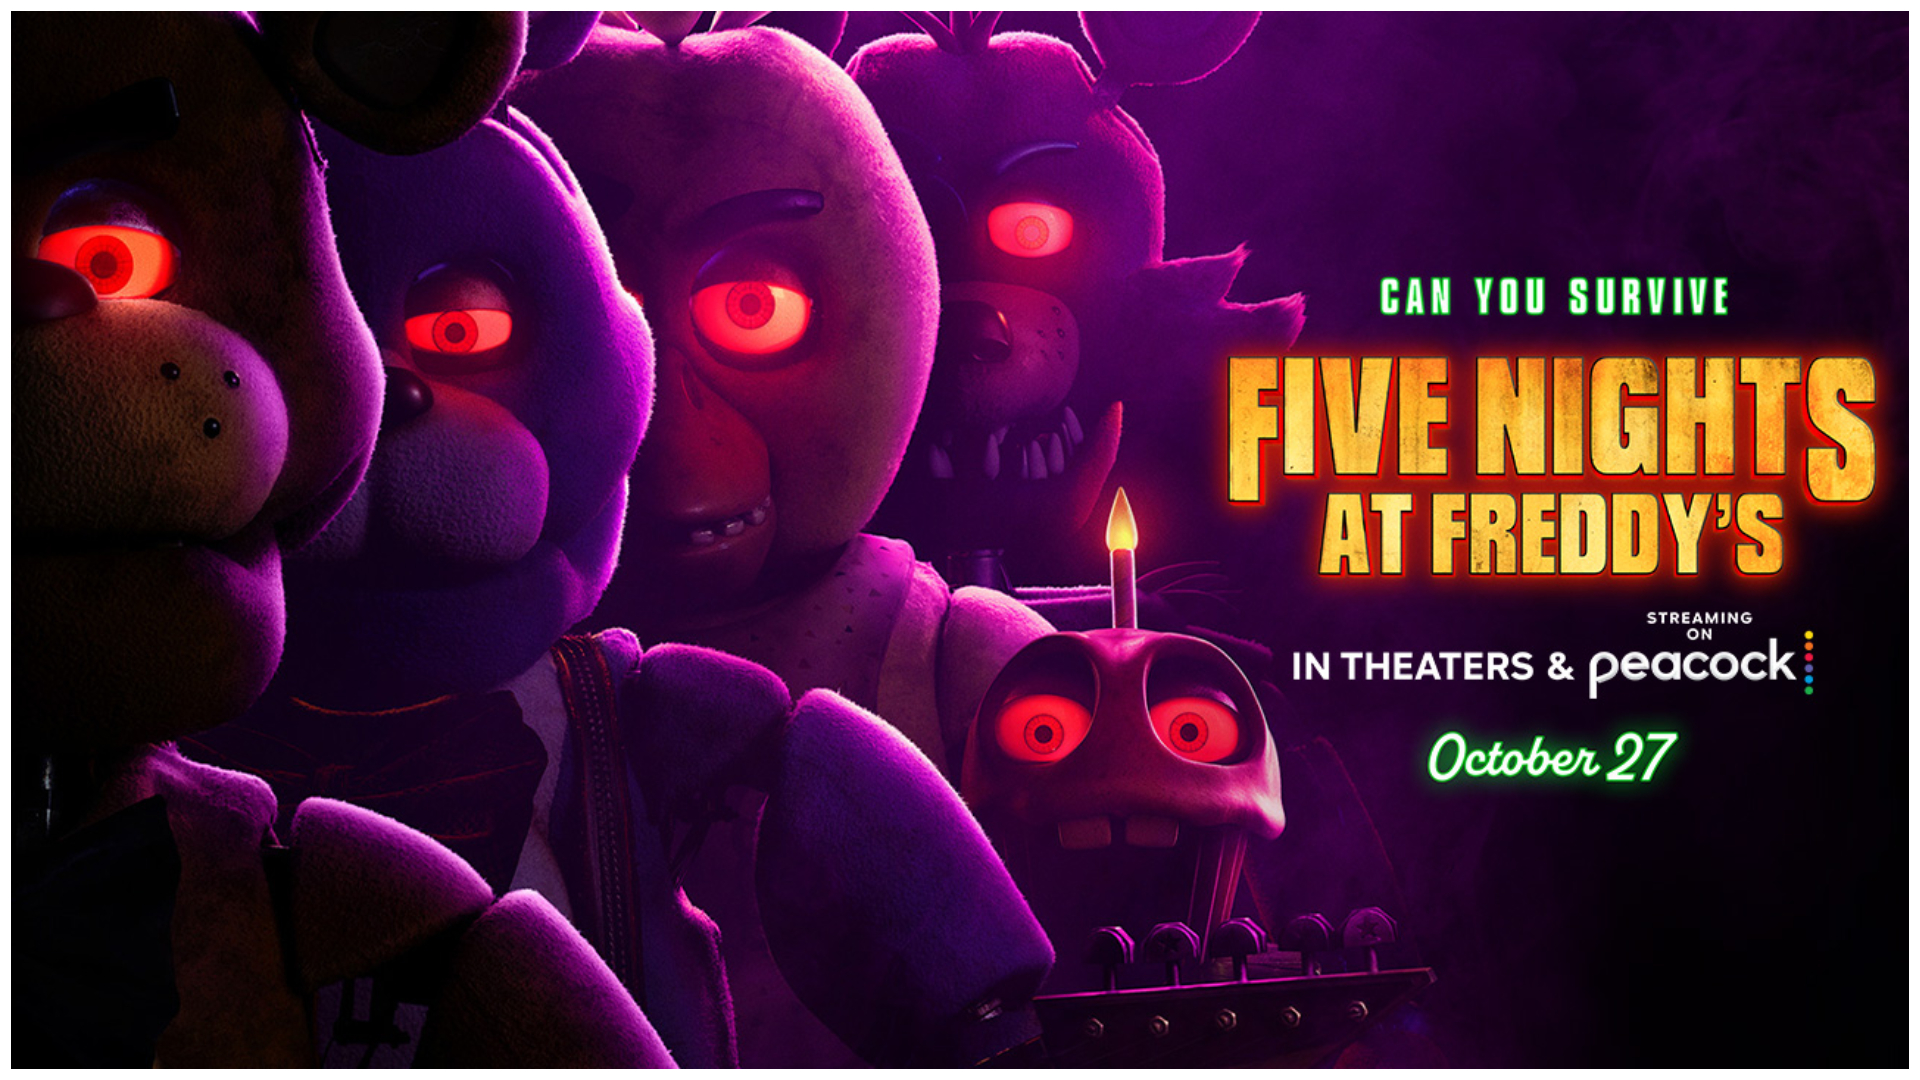 Five Nights at Freddy’s’ movie set for 2023 release